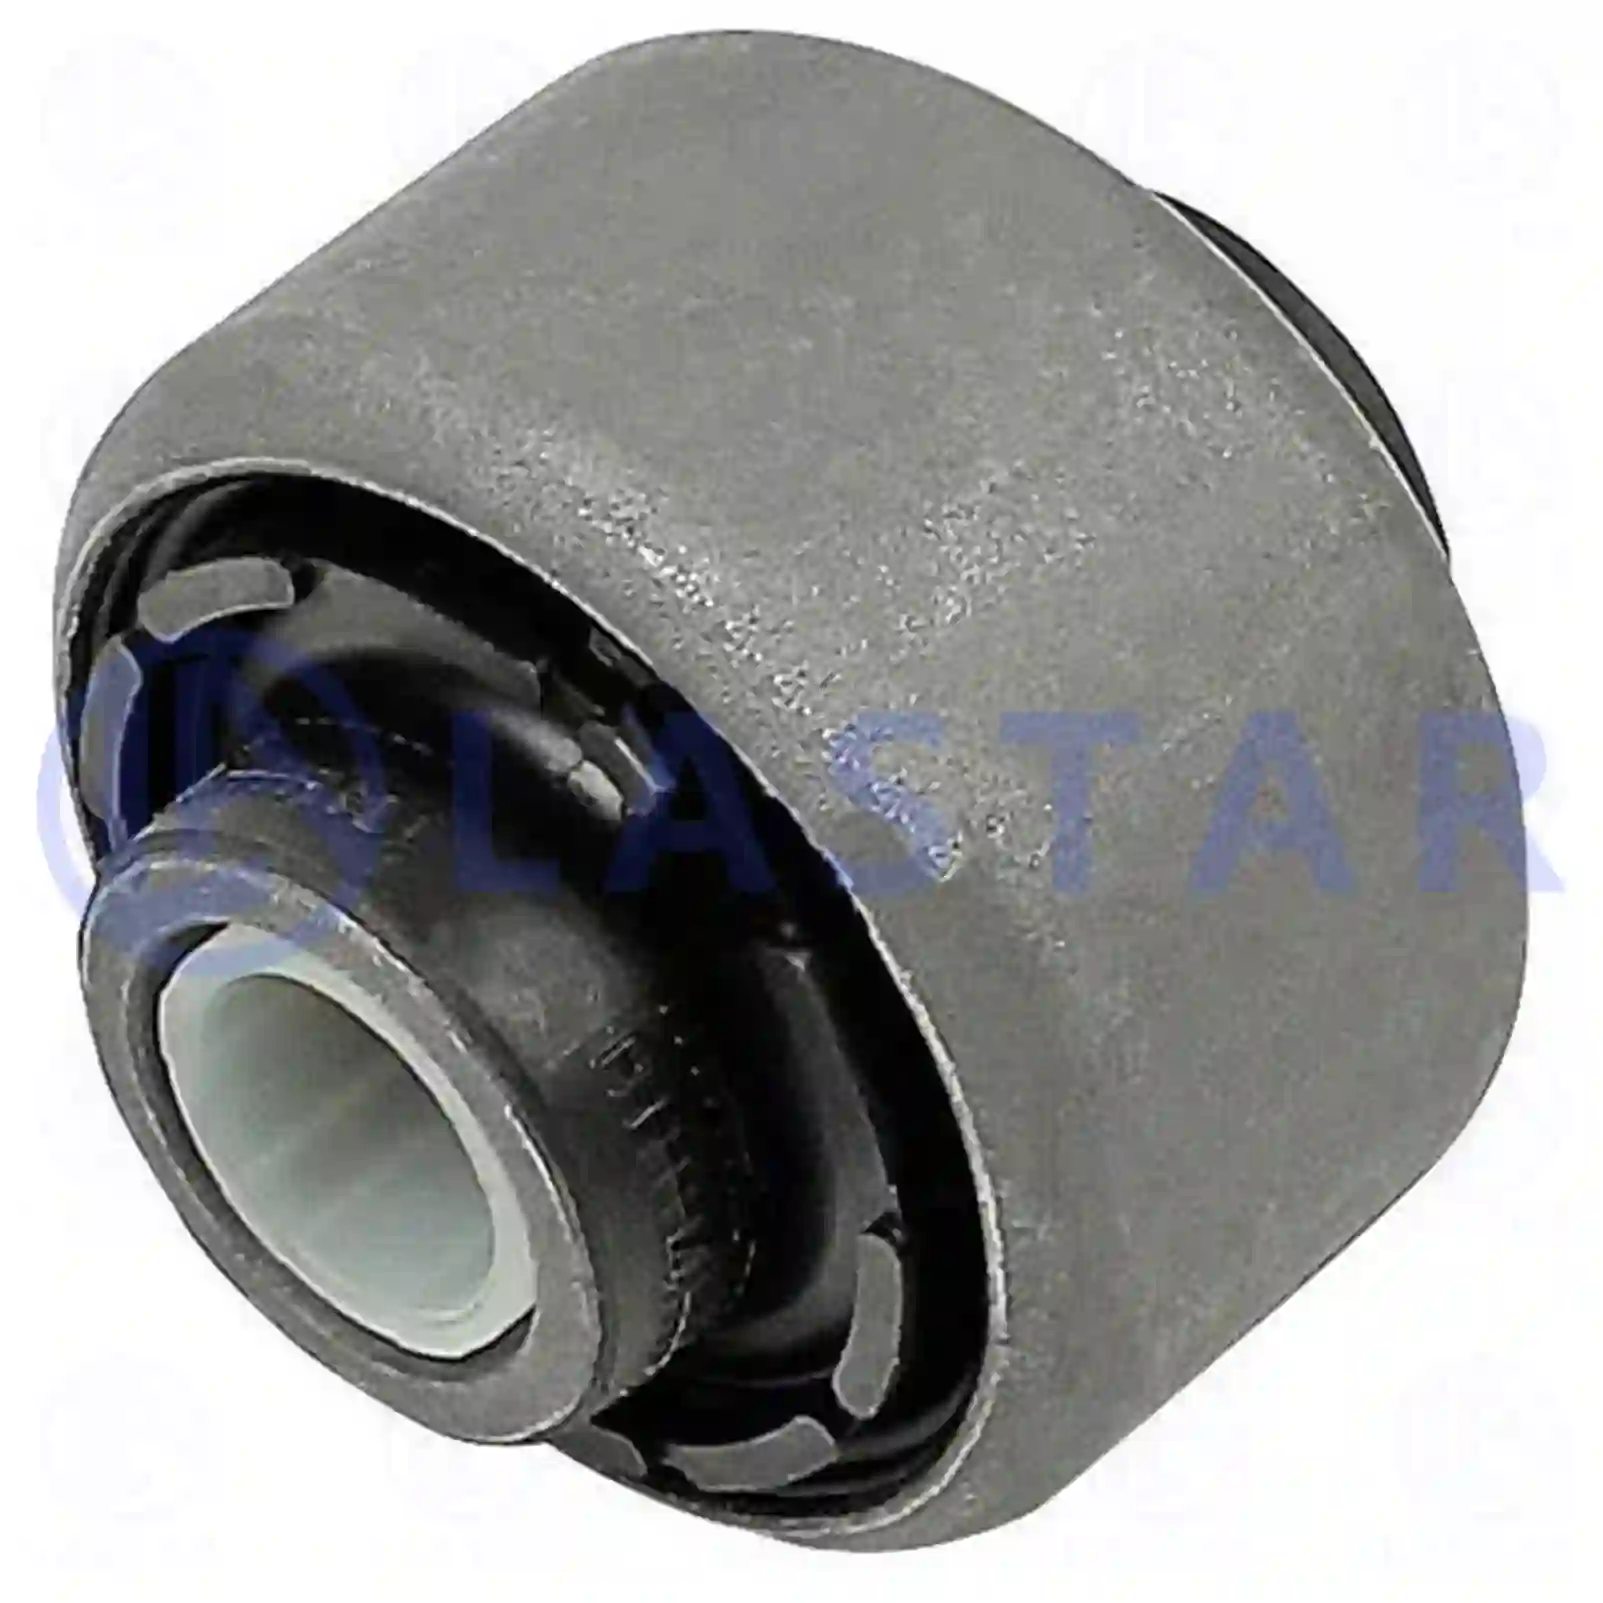 Bushing, stabilizer, 77728304, 0009980642, 9609980142, ||  77728304 Lastar Spare Part | Truck Spare Parts, Auotomotive Spare Parts Bushing, stabilizer, 77728304, 0009980642, 9609980142, ||  77728304 Lastar Spare Part | Truck Spare Parts, Auotomotive Spare Parts